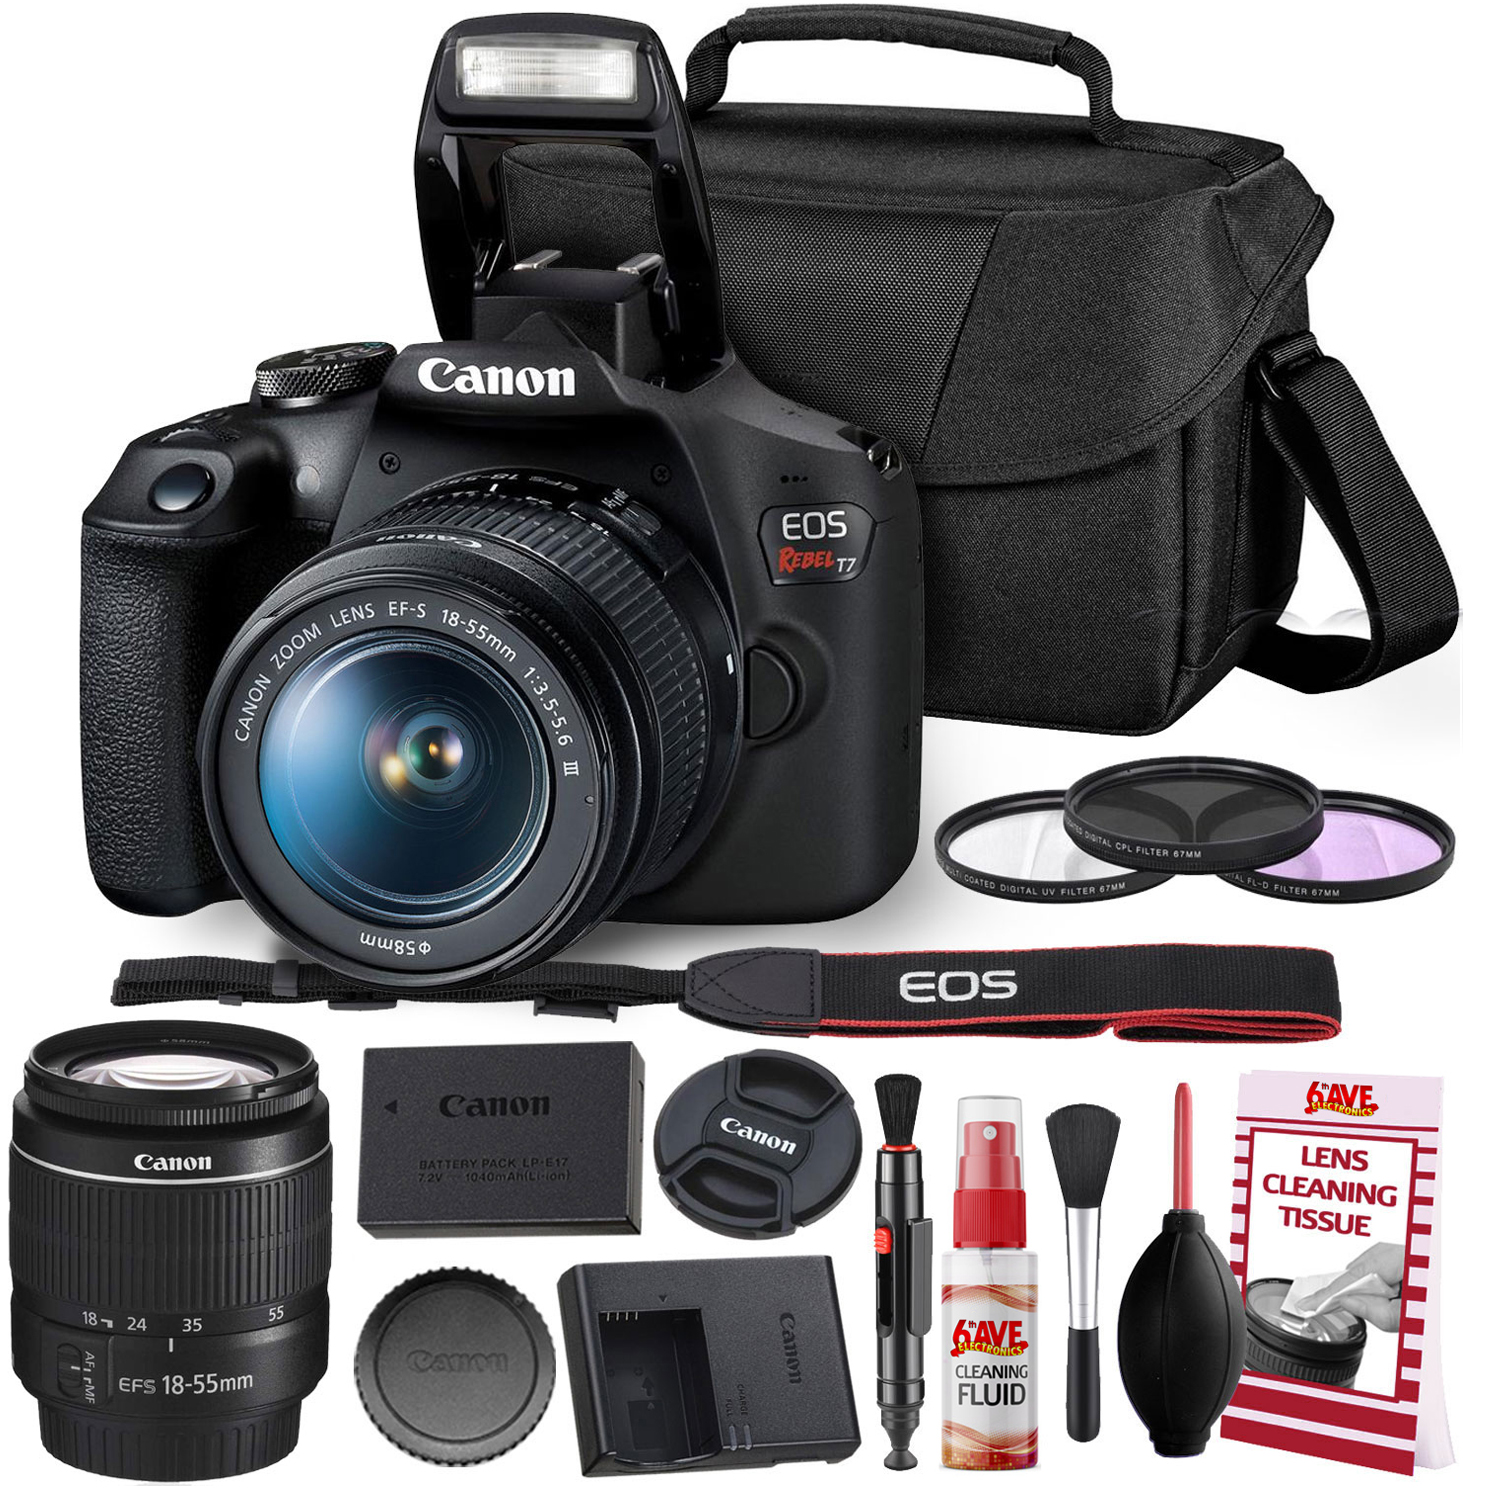 Canon Rebel T7 DSLR Camera with 18-55mm  Lens Kit and Carrying Case, Creative Filters, Cleaning Kit, and More - image 1 of 6